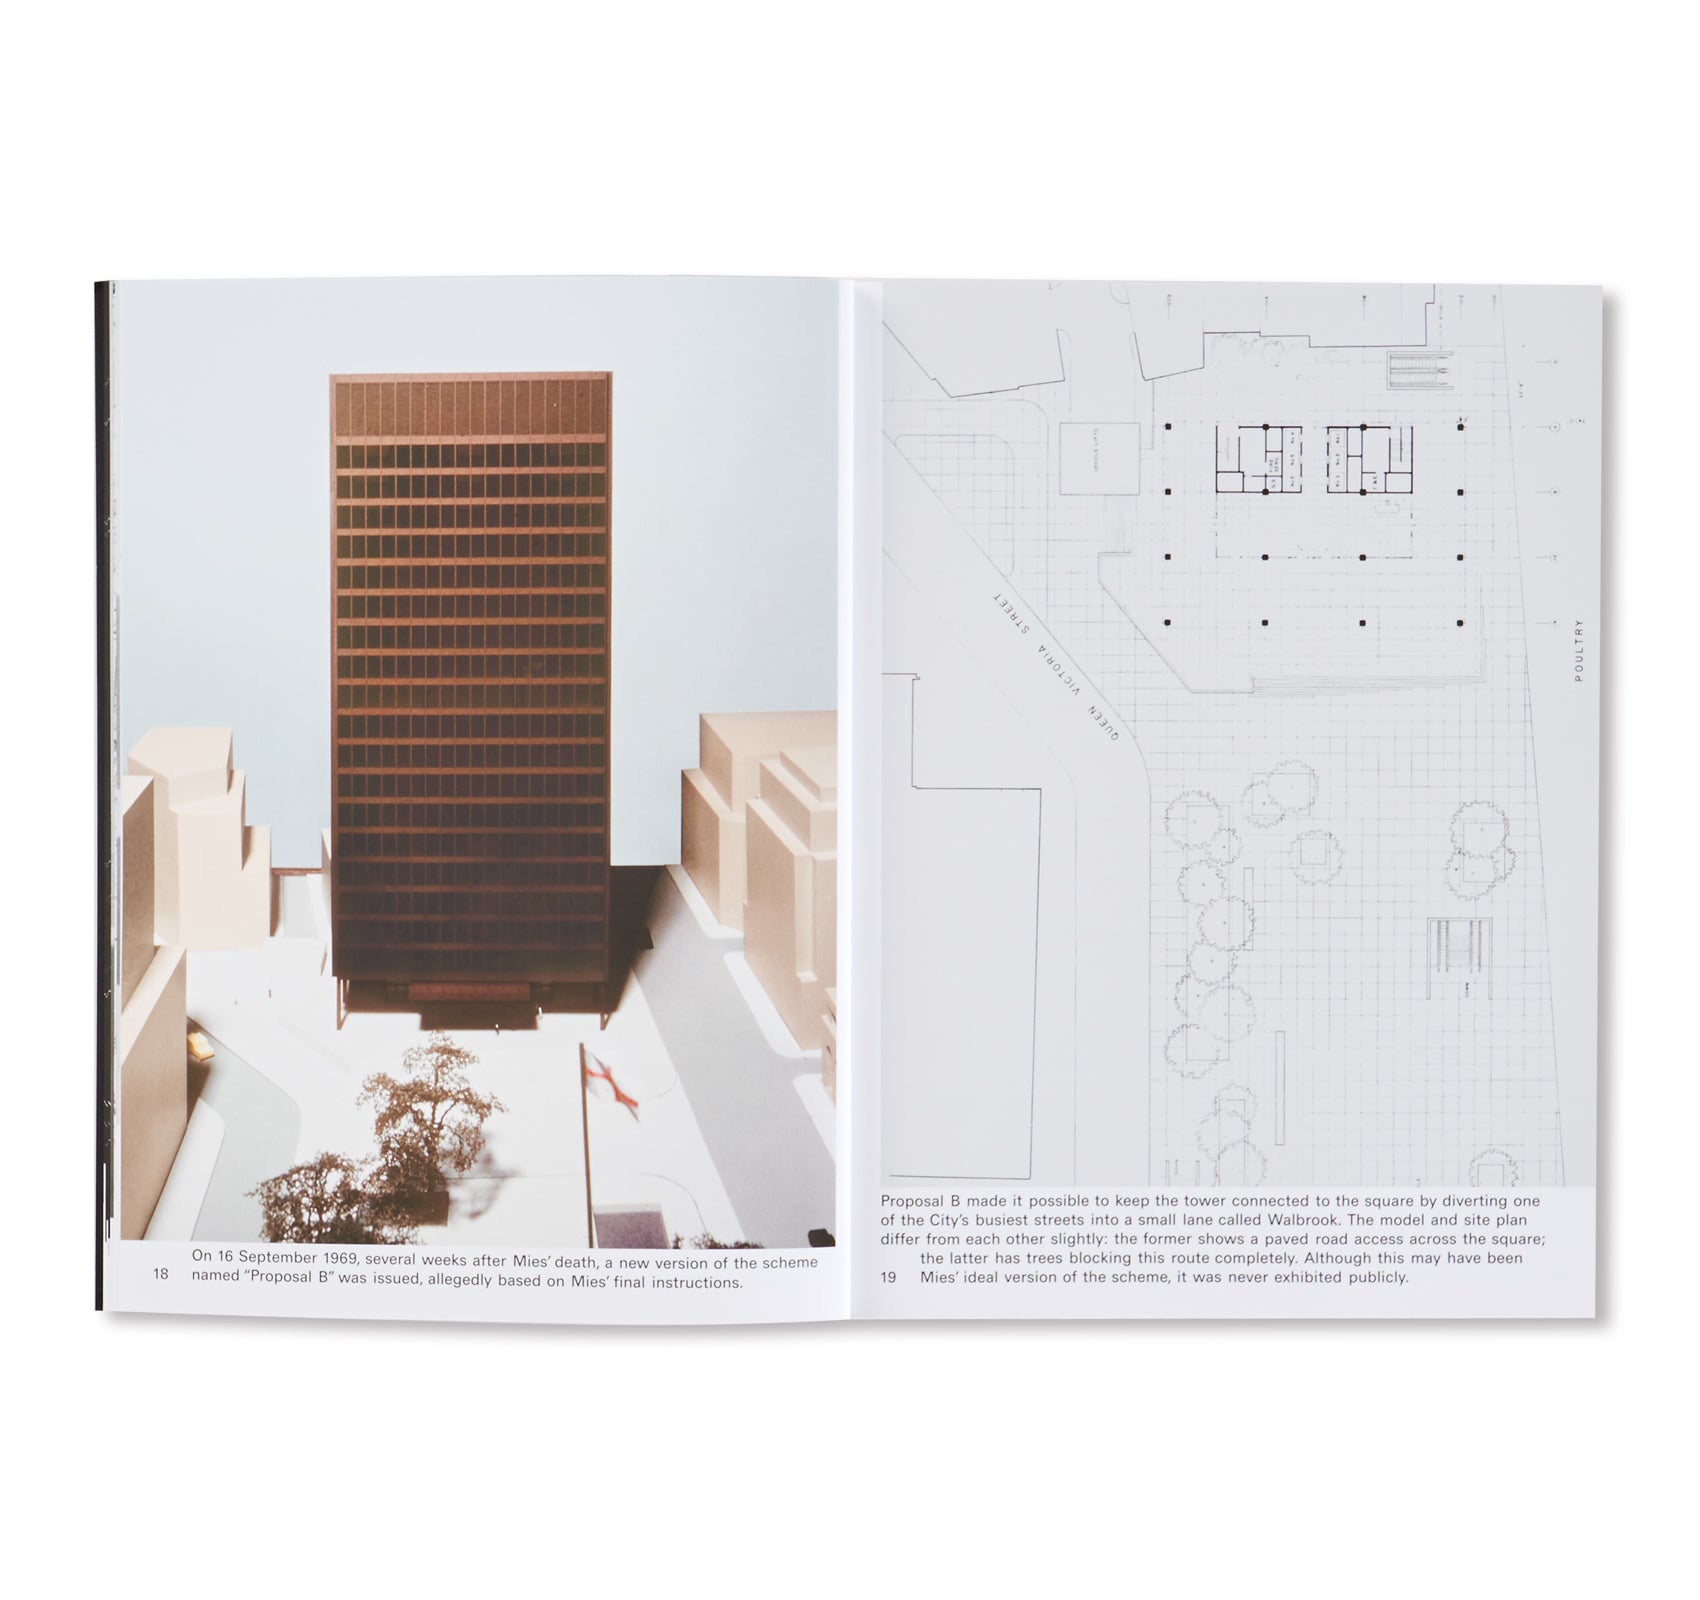 MIES IN LONDON by Mies van der Rohe [SOFTCOVER]